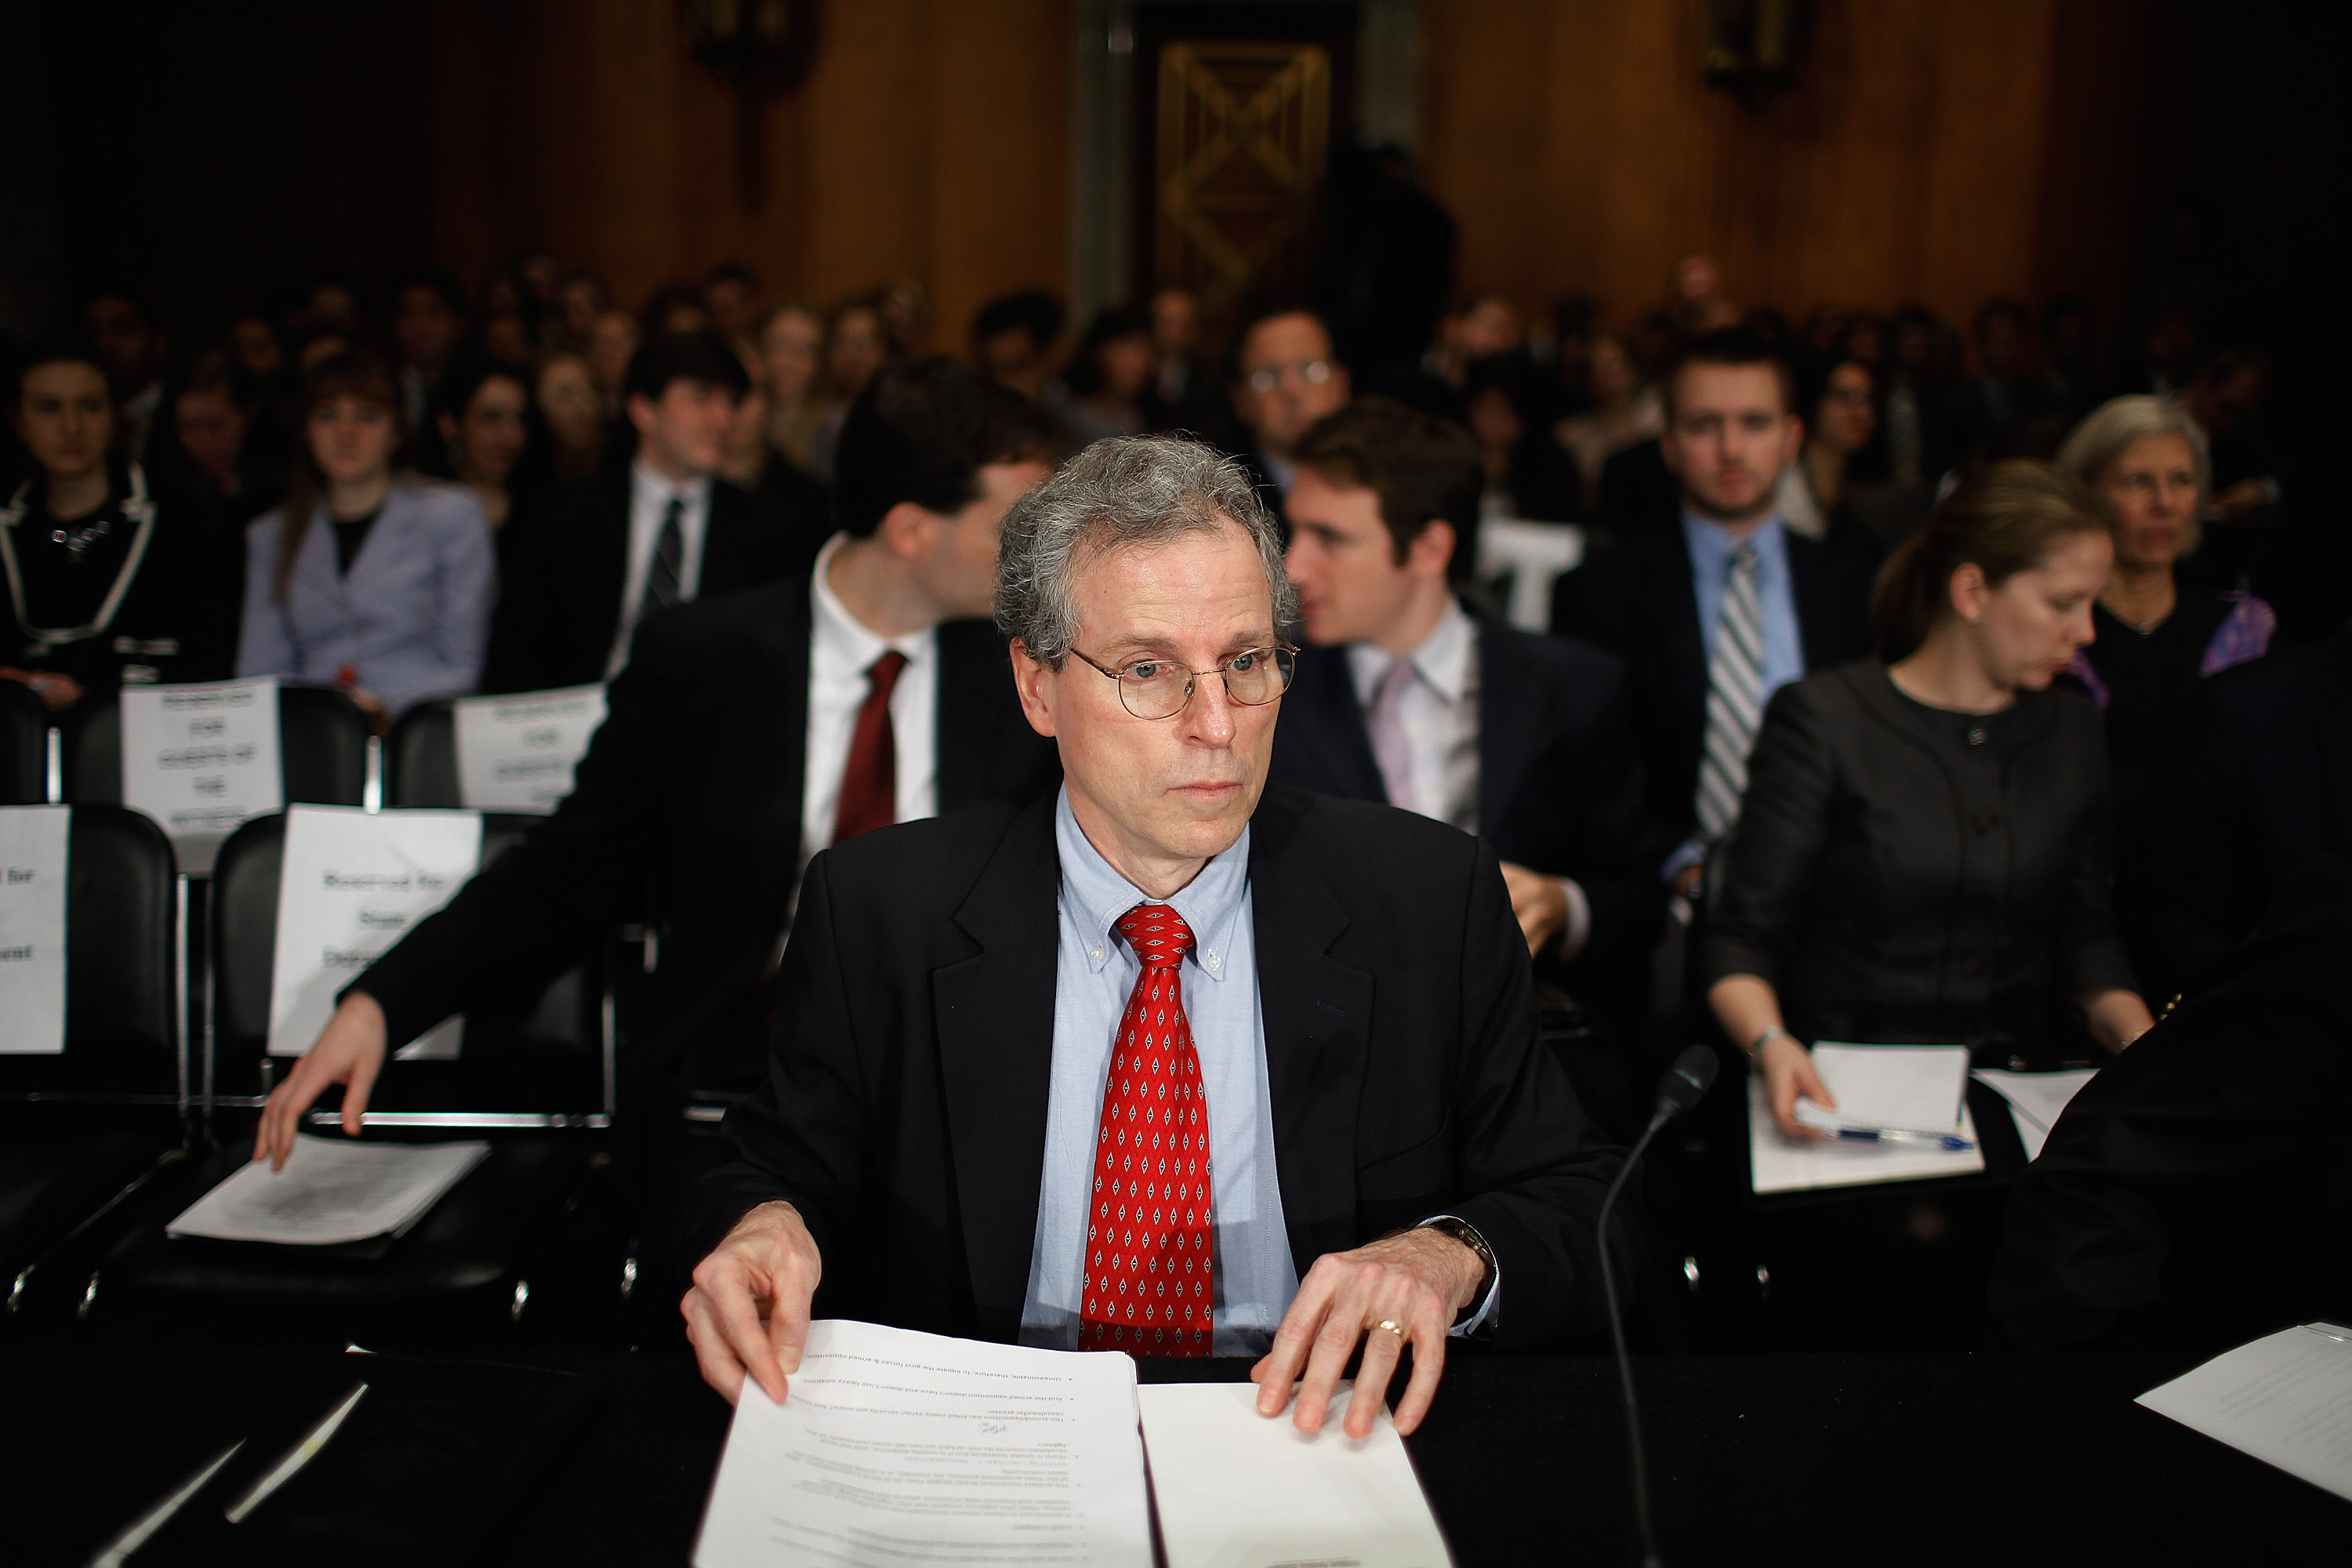 WASHINGTON, DC - MARCH 01: U.S. Ambassador to Syria Robert Ford prepares to testify before the Senate Foreign Relations Committee on Capitol Hill March 1, 2012 in Washington, DC. The Obama administration pulled Ford and his staff out of Syria in December after it was clear that President Bashar Assad's regime could not guarantee their security. The nearly year-long uprising against the Assad regime continues; however, rebels were forced today to retreat from their stronghold the city of Homs. (Photo by Chip Somodevilla/Getty Images)